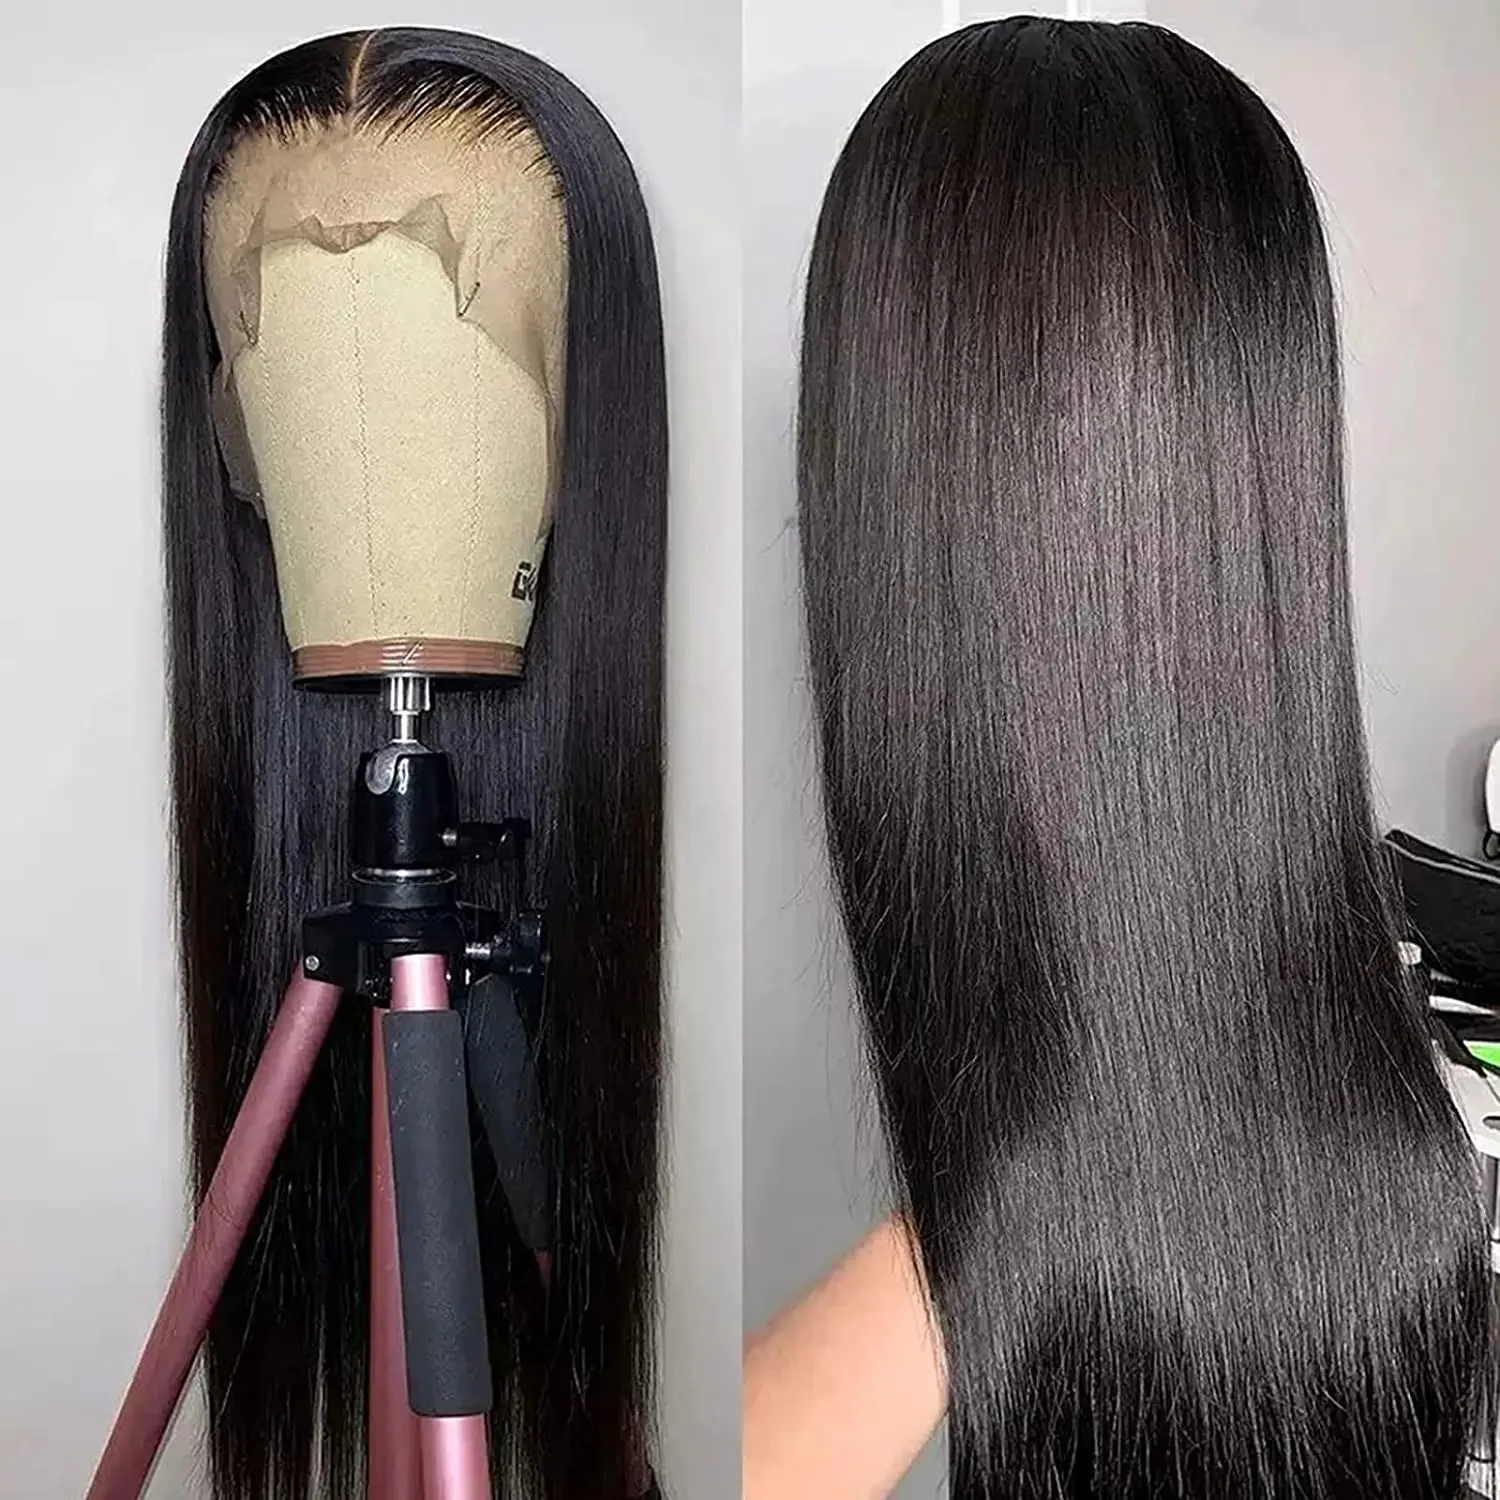 

Wholesale Wigs Virgin Hair Vendor Cuticle Aligned Human Hair Silky Straight Lace Frontal Wigs For Women